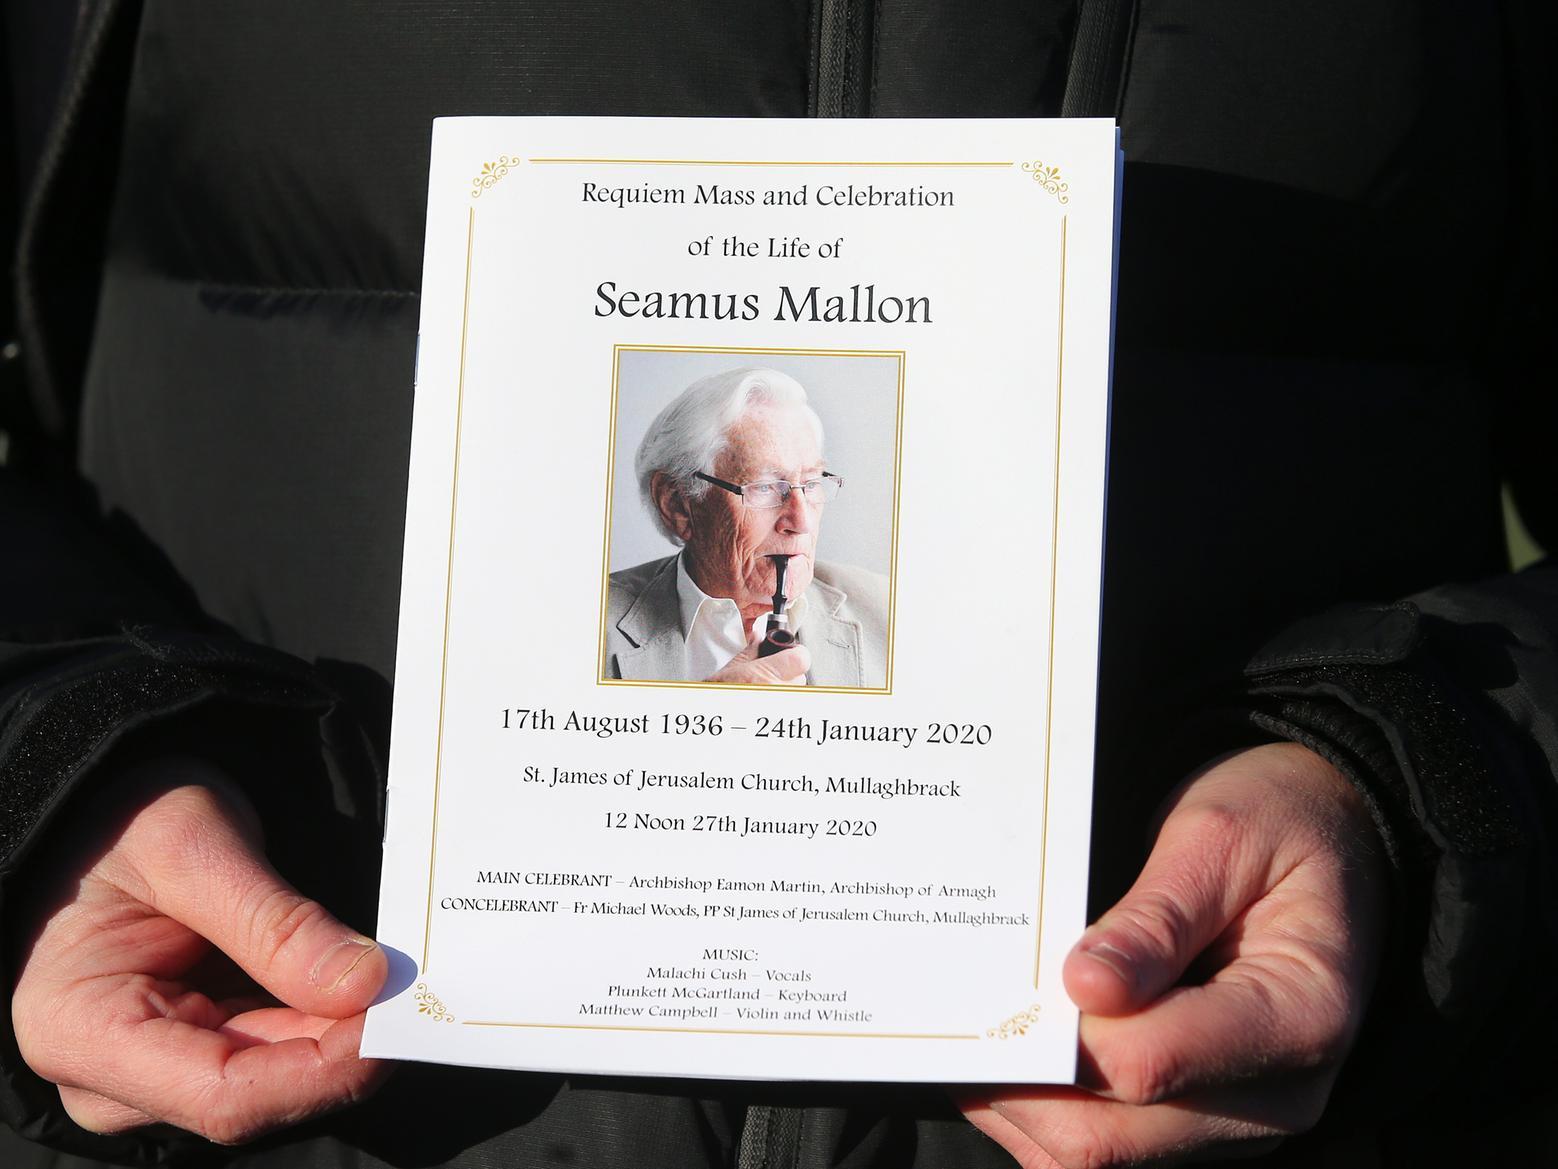 The order of service for the funeral of Seamus Mallon.